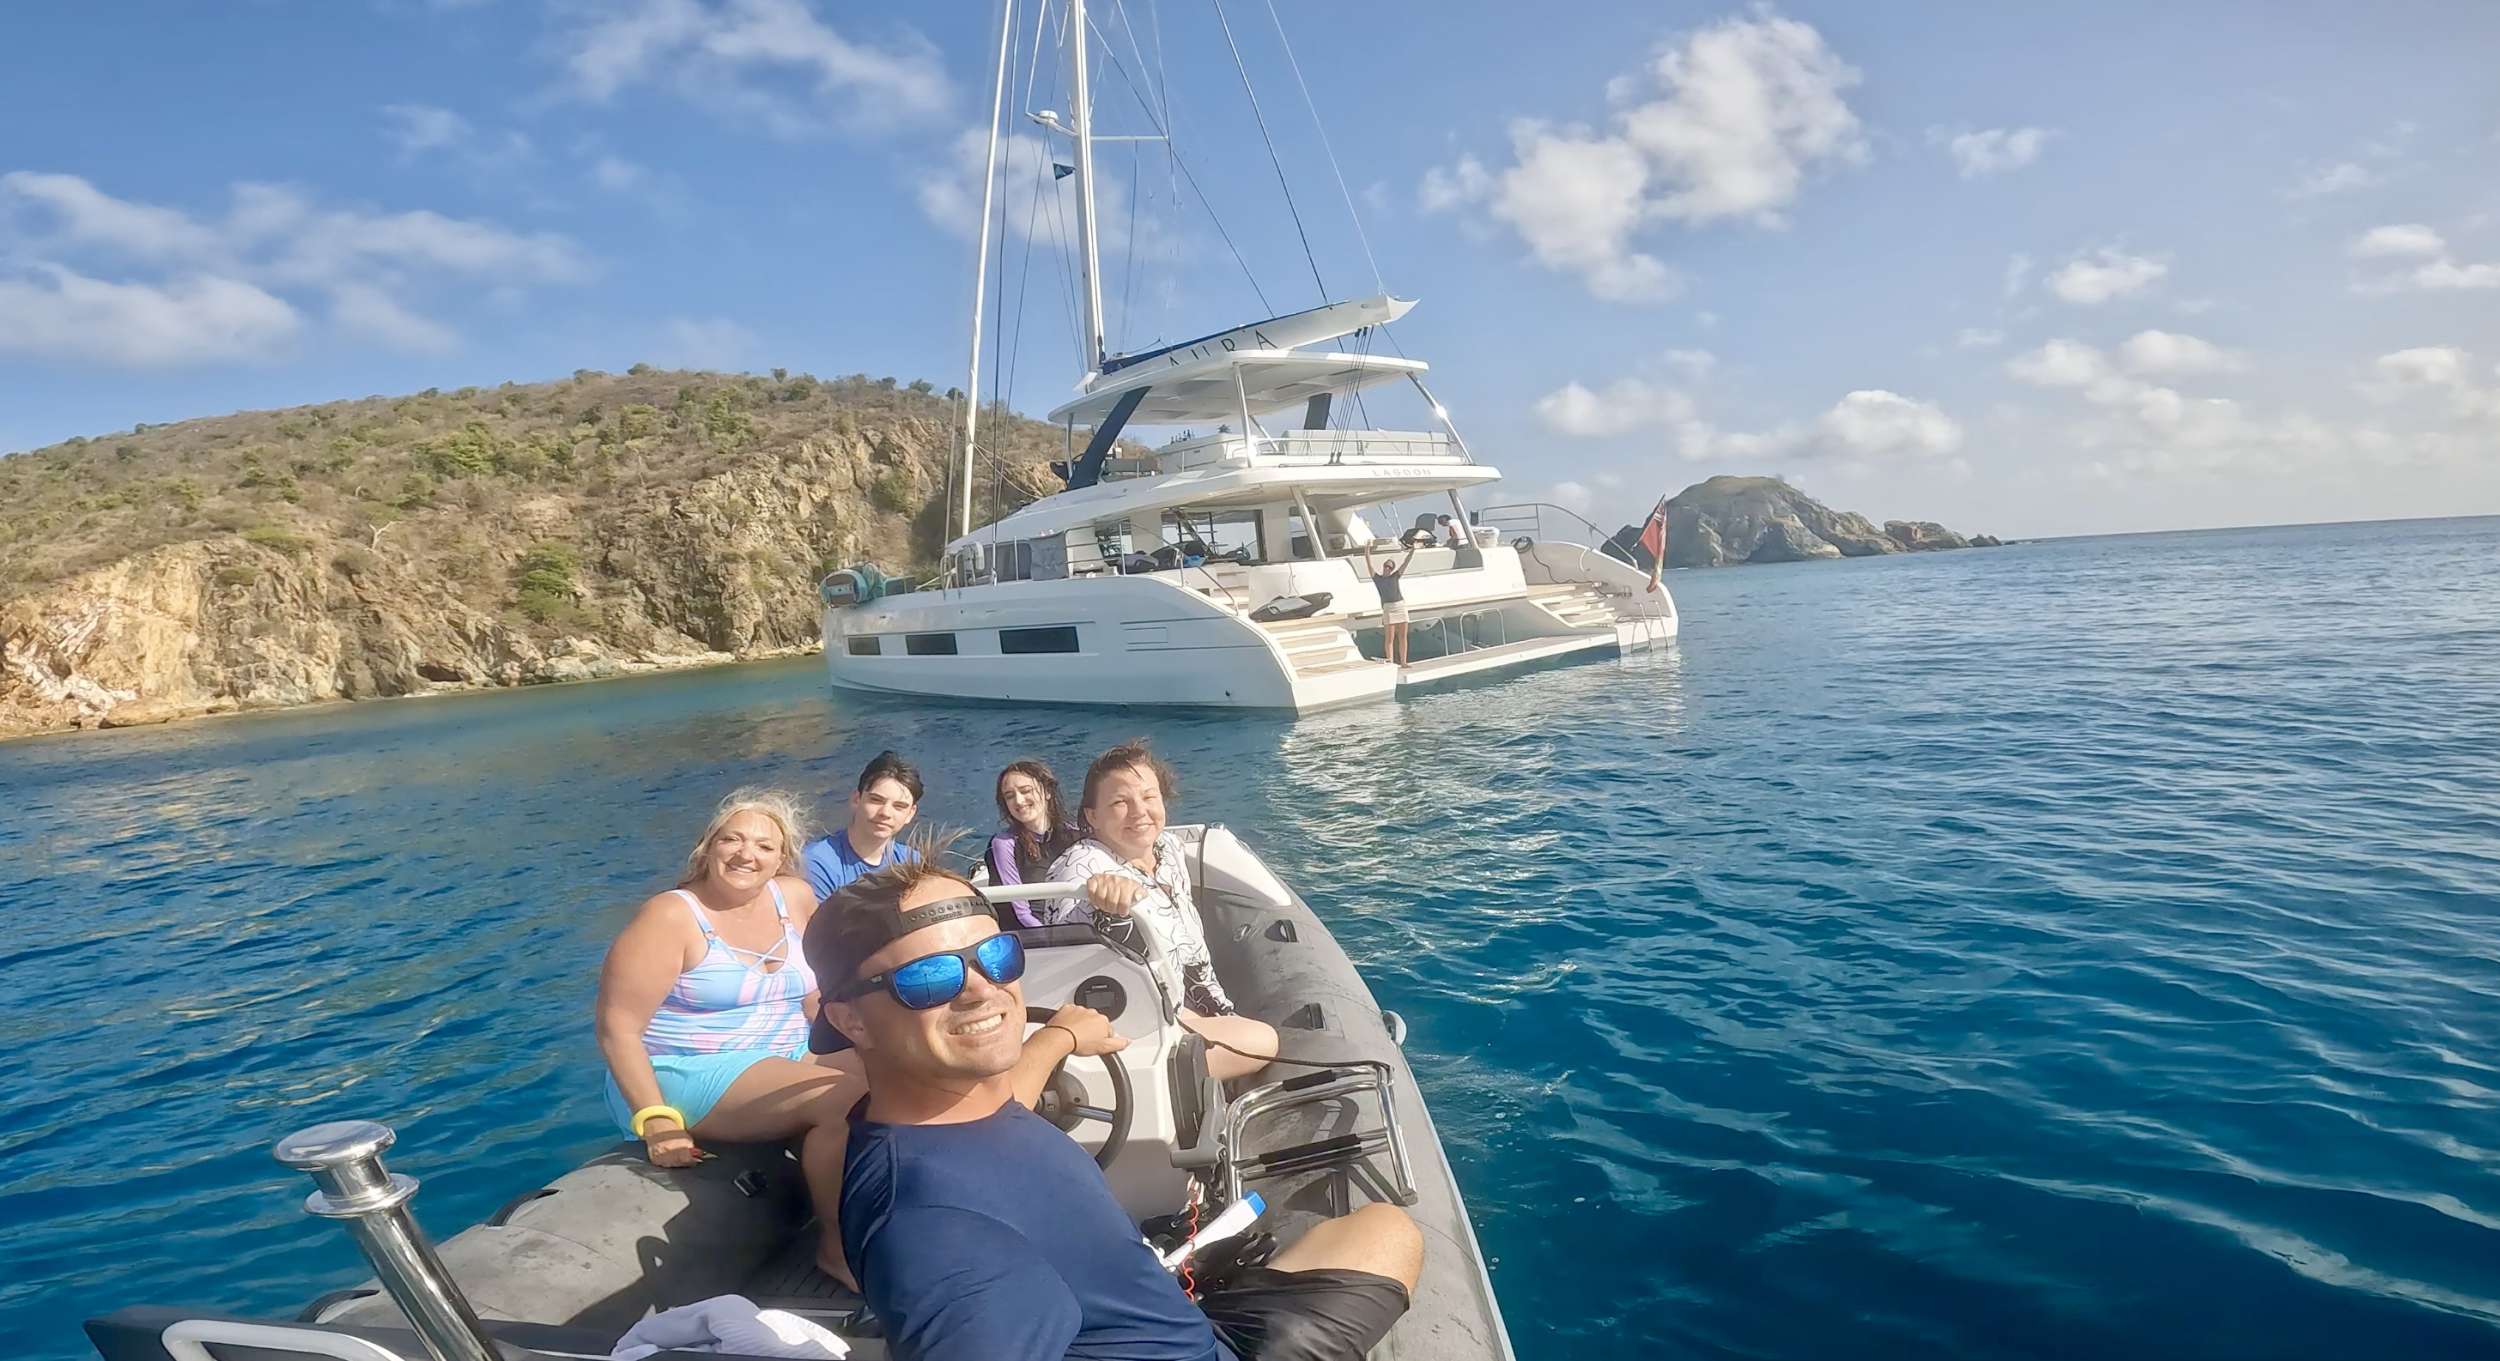 Aura Catamaran guests in the dinghy taling a selfie with the yacht in the background